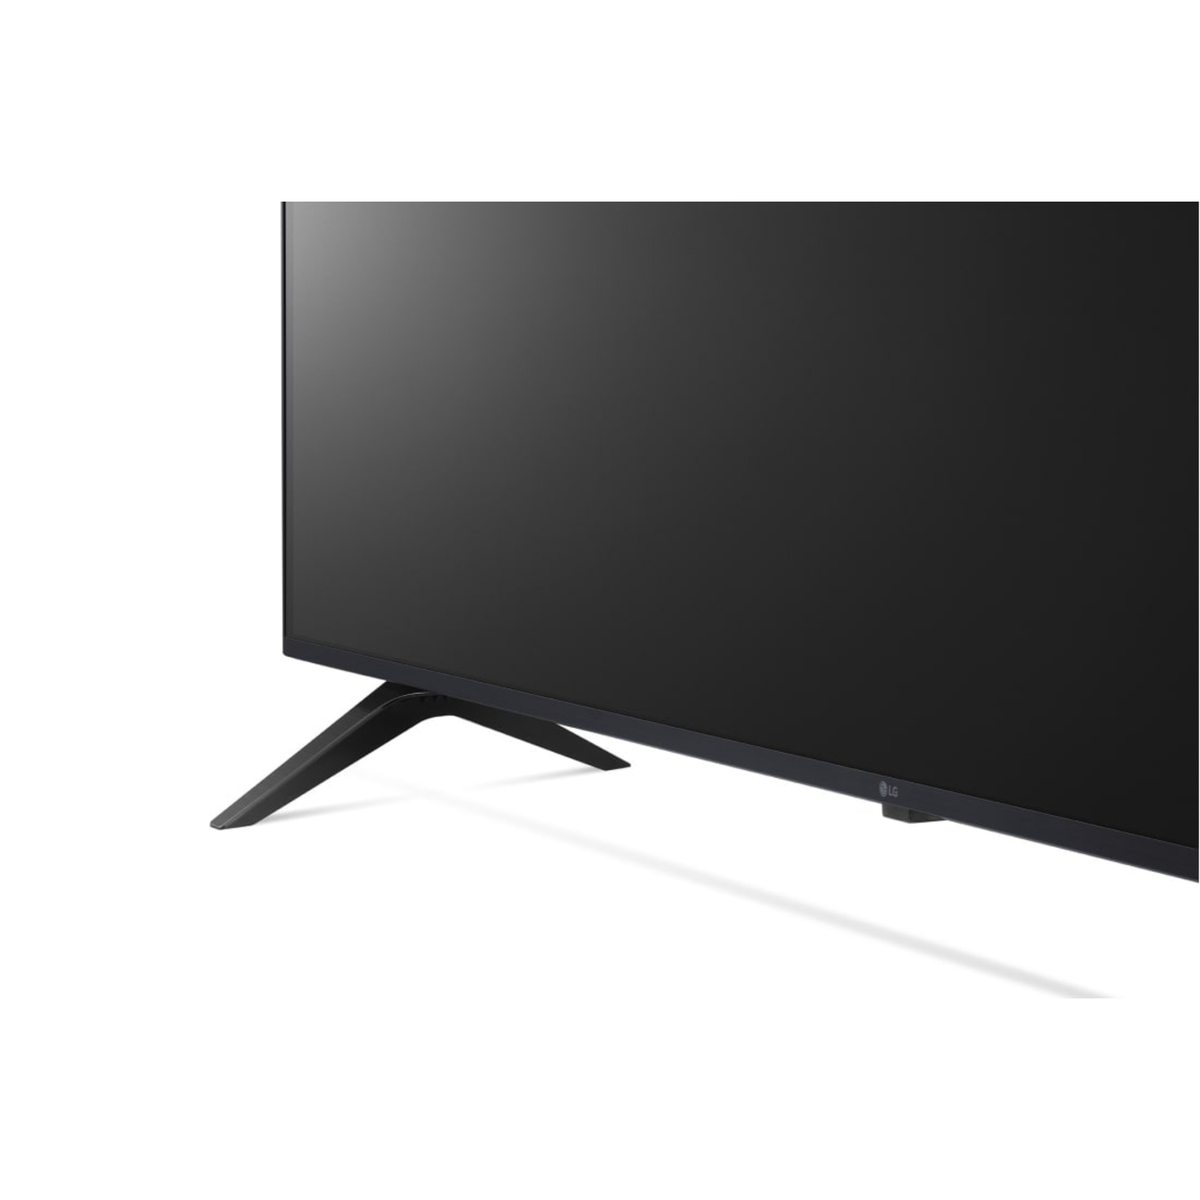 LG 55 Inches 4K Smart UHD TV with Magic remote, HDR, WebOS, 55UR80006LJ